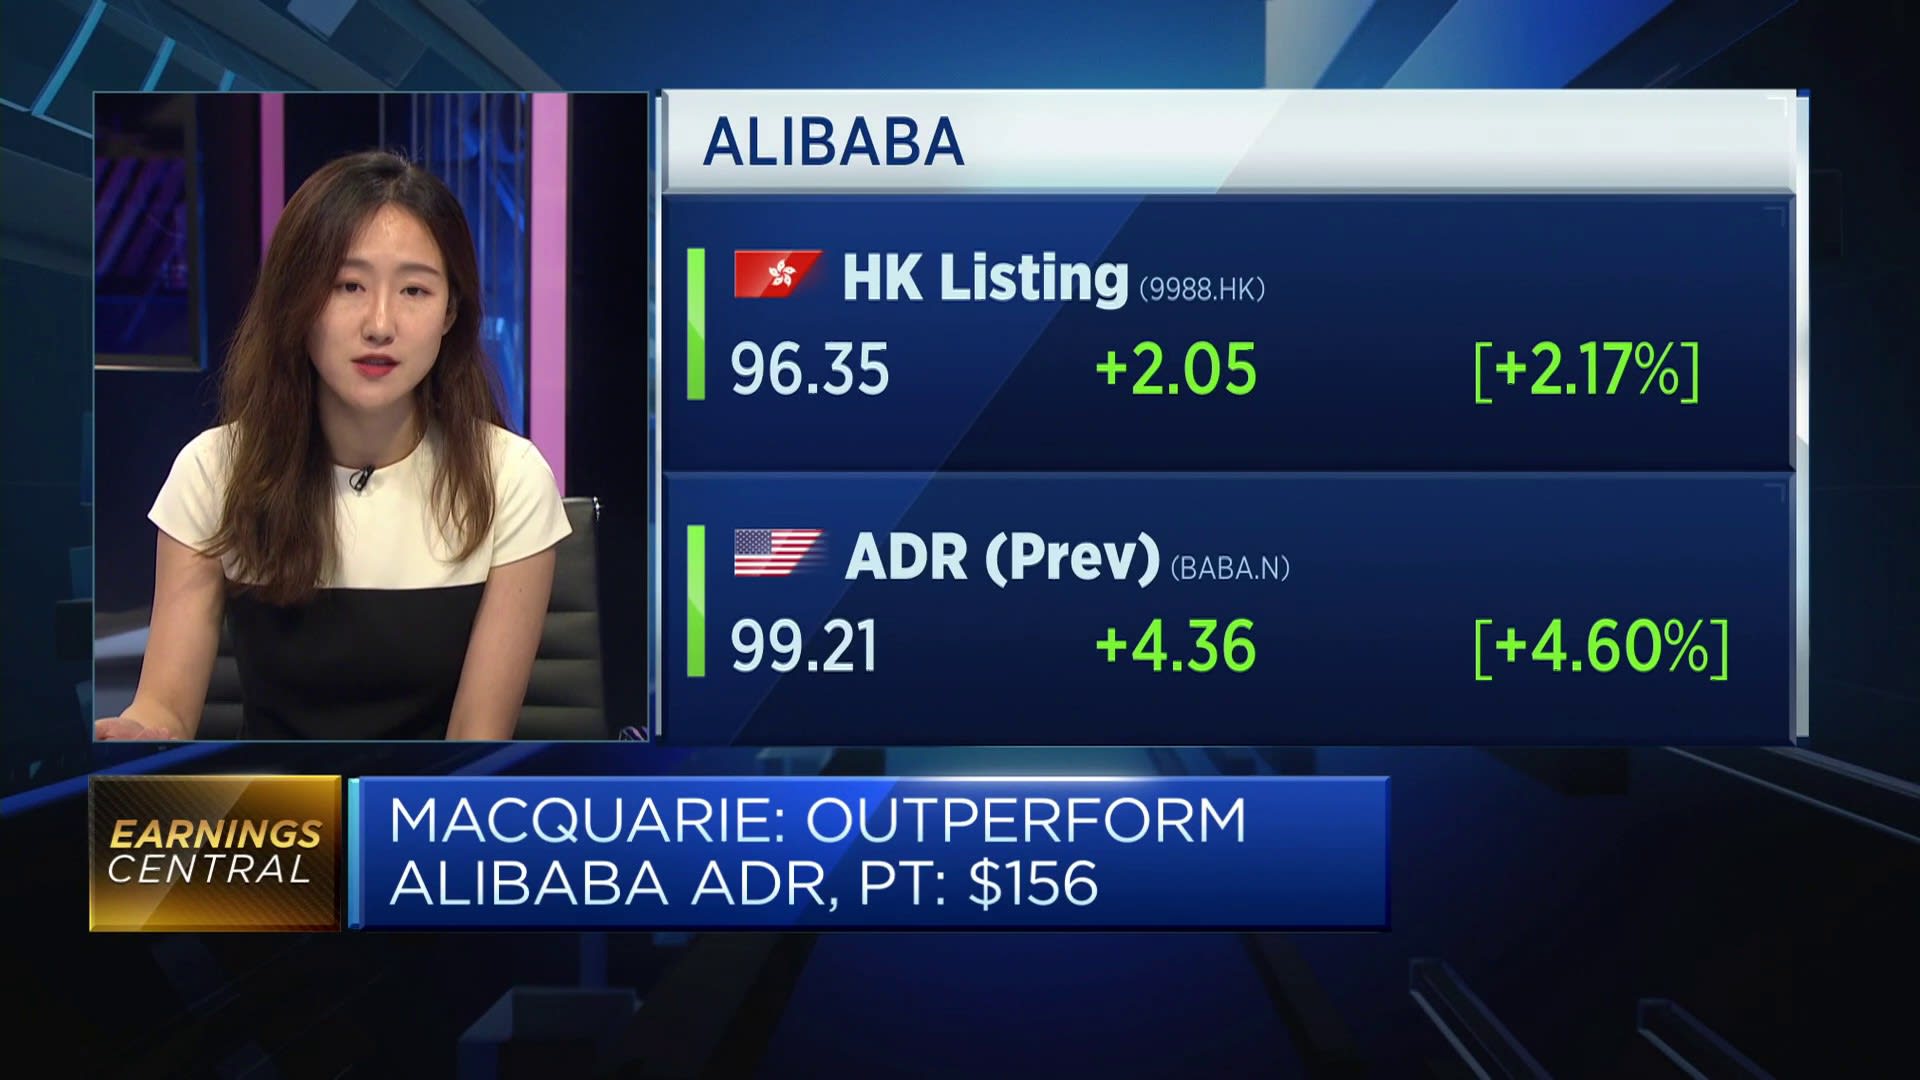 Alibaba is well-positioned to take advantage of China's consumption recovery: Macquarie